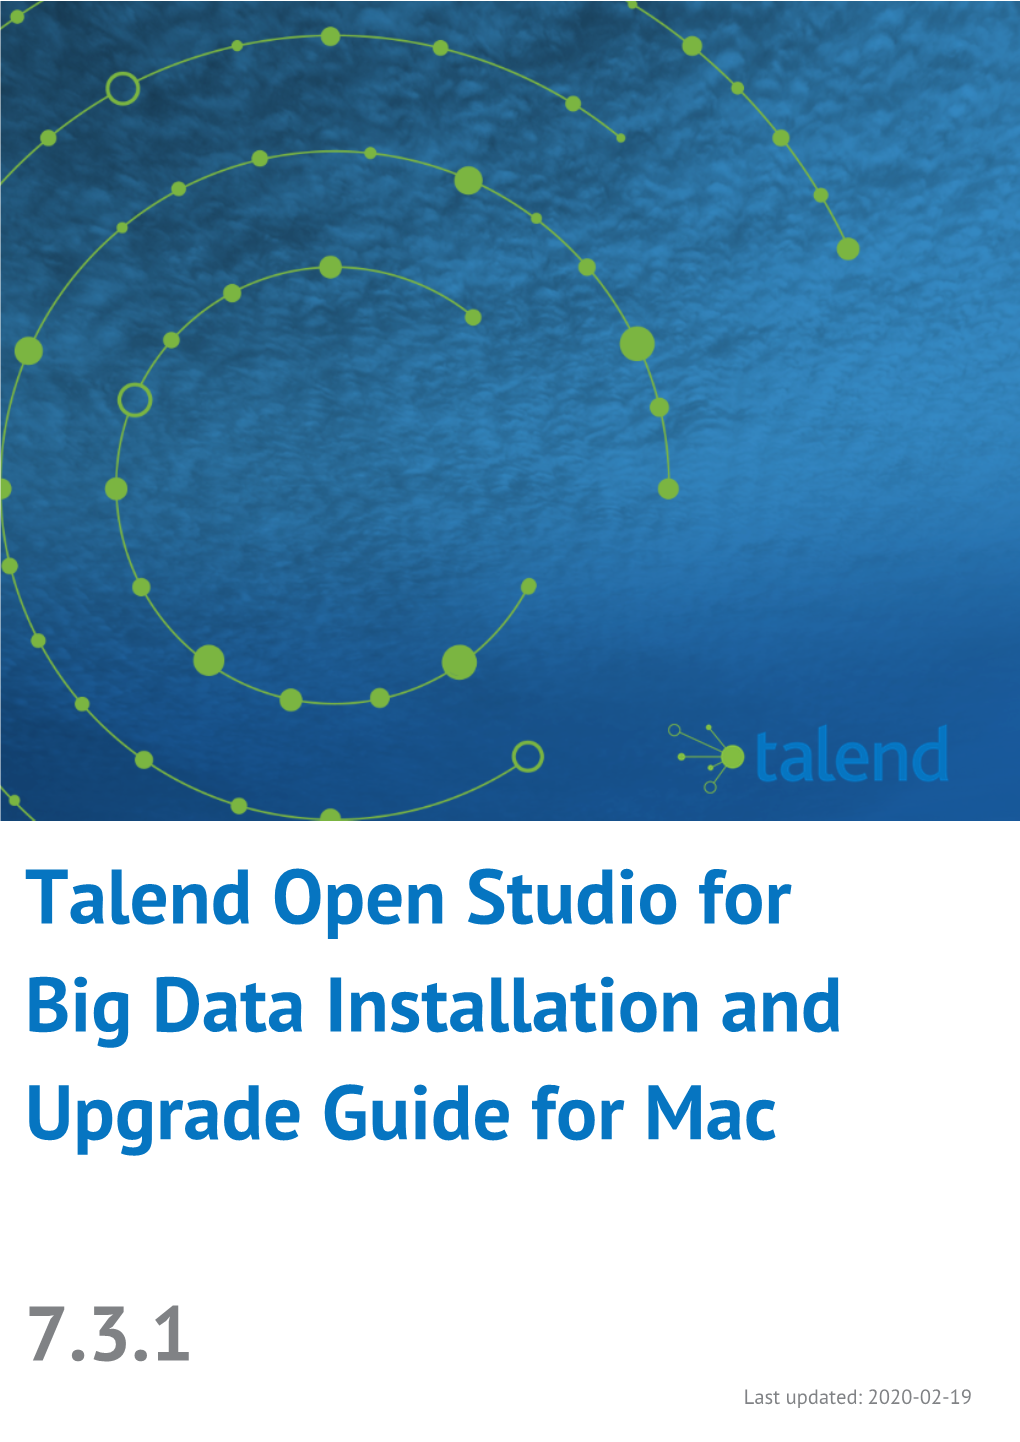 Talend Open Studio for Big Data Installation and Upgrade Guide for Mac